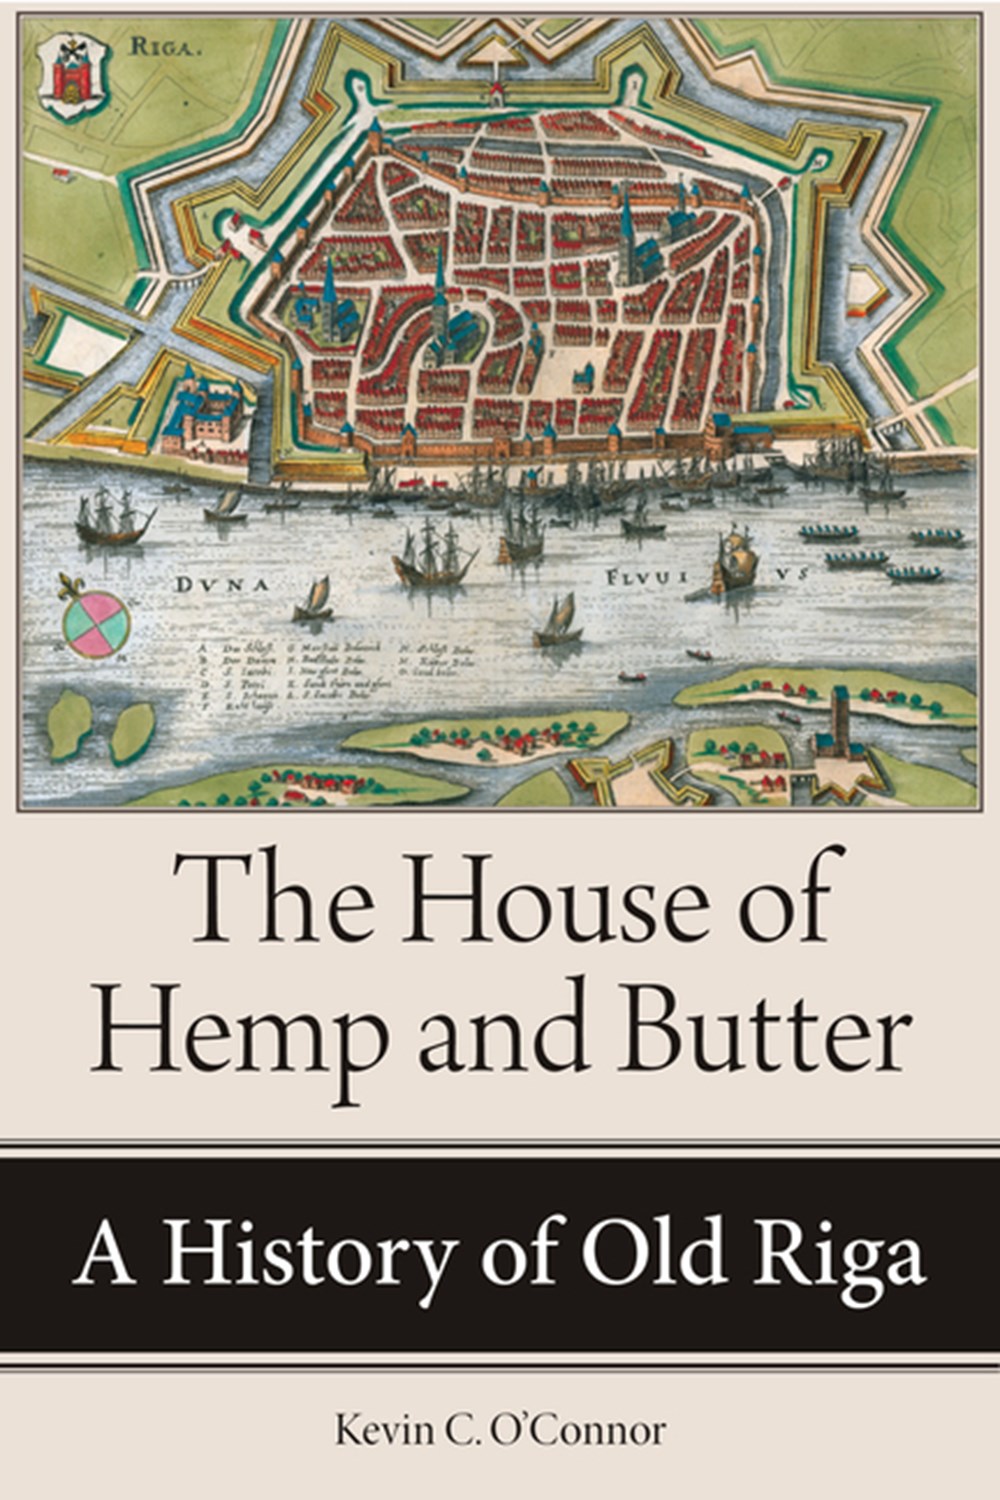 House of Hemp and Butter